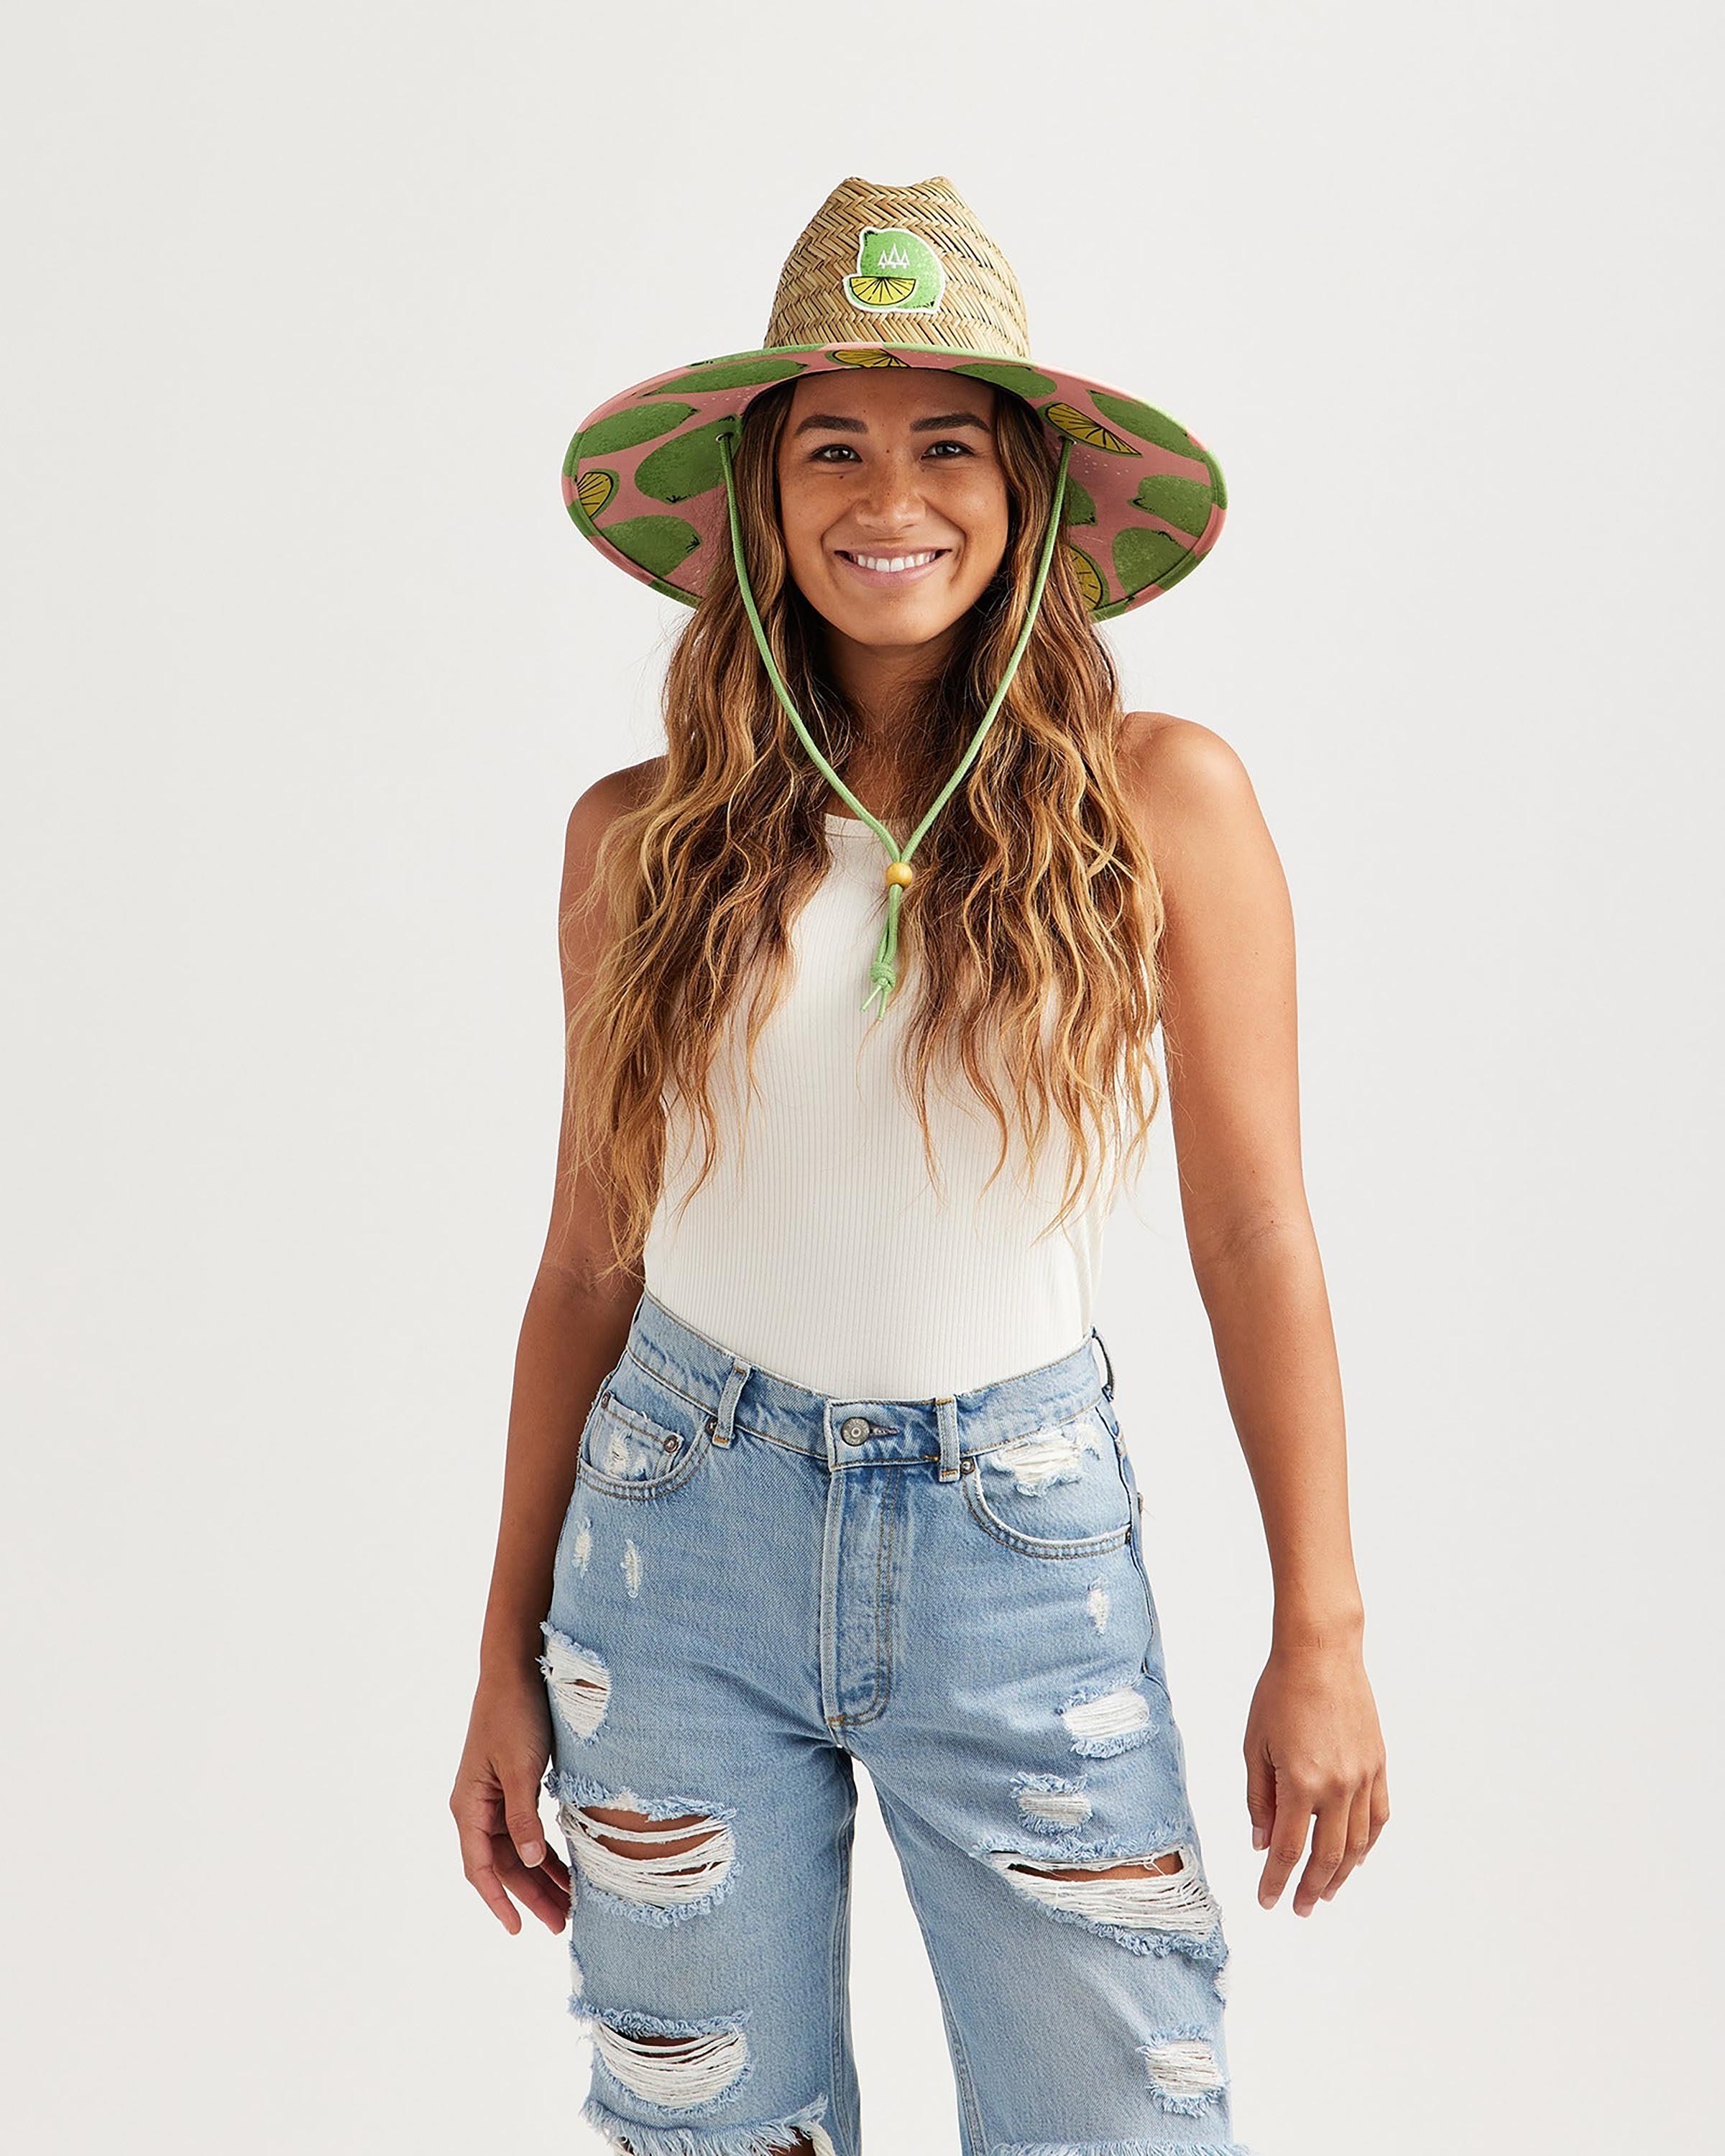 Hemlock female model looking straight wearing Cadillac straw lifeguard hat with lime pattern